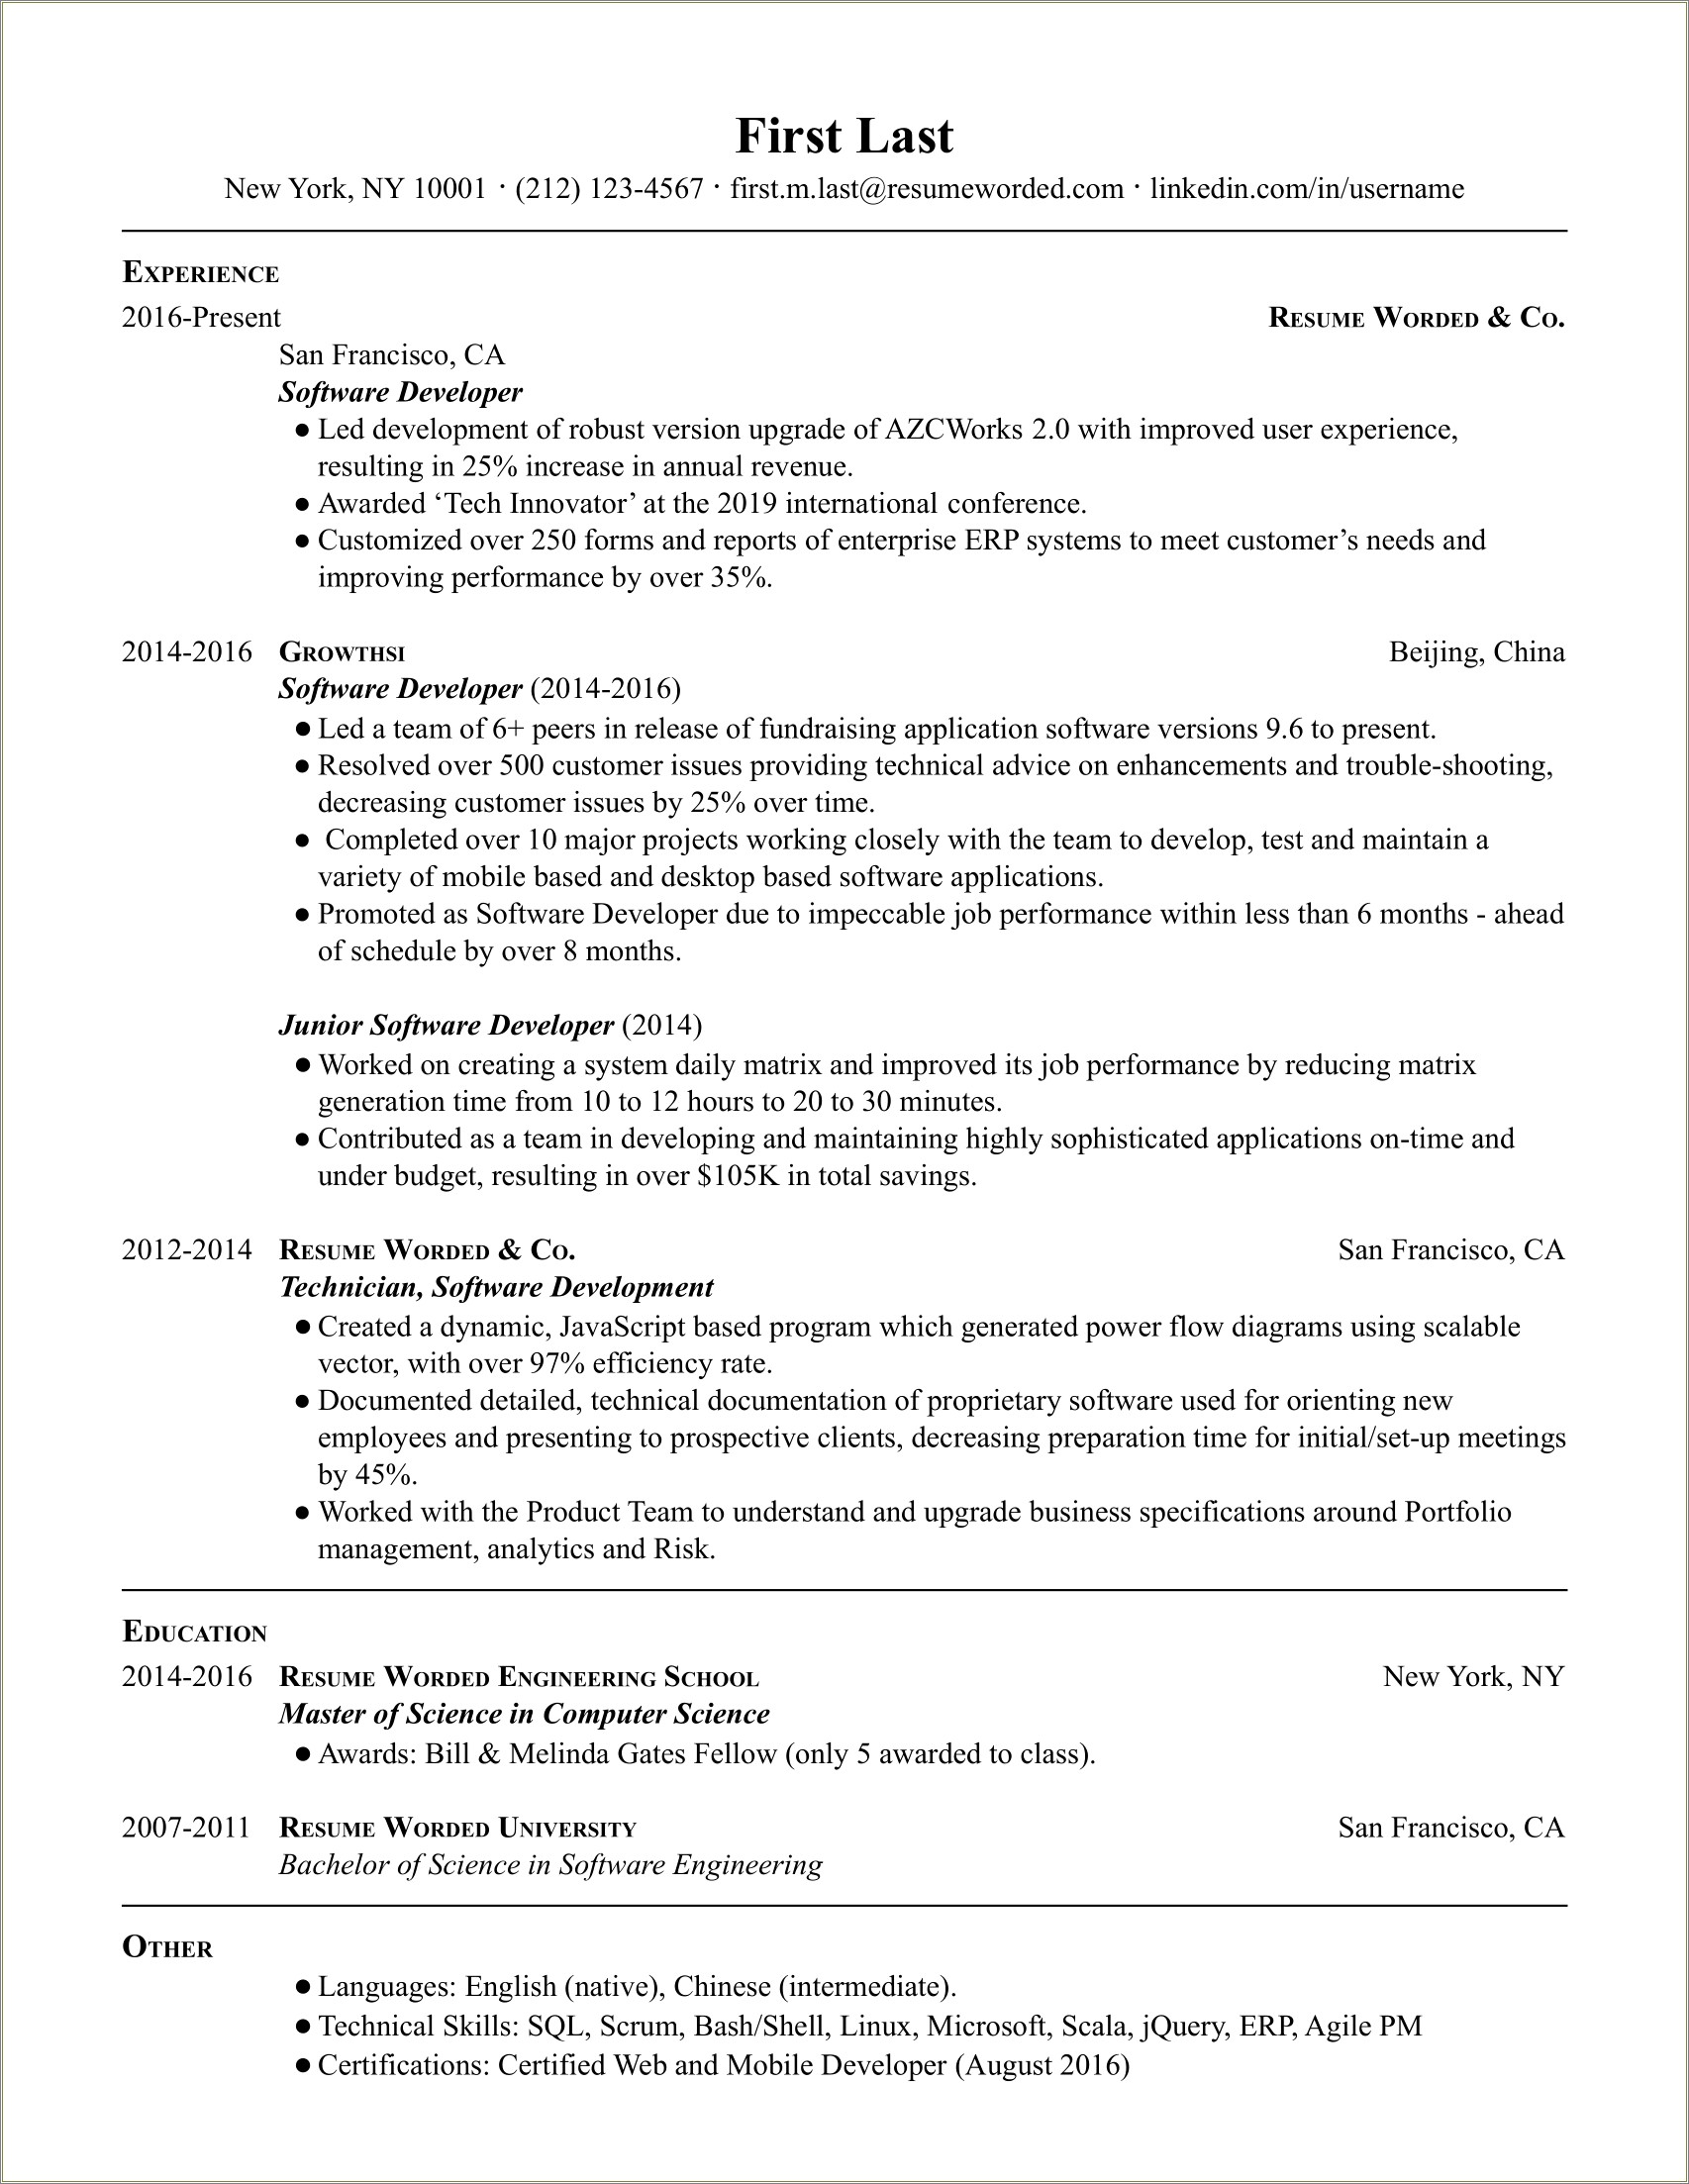 Worked As A Developer On Team Resume